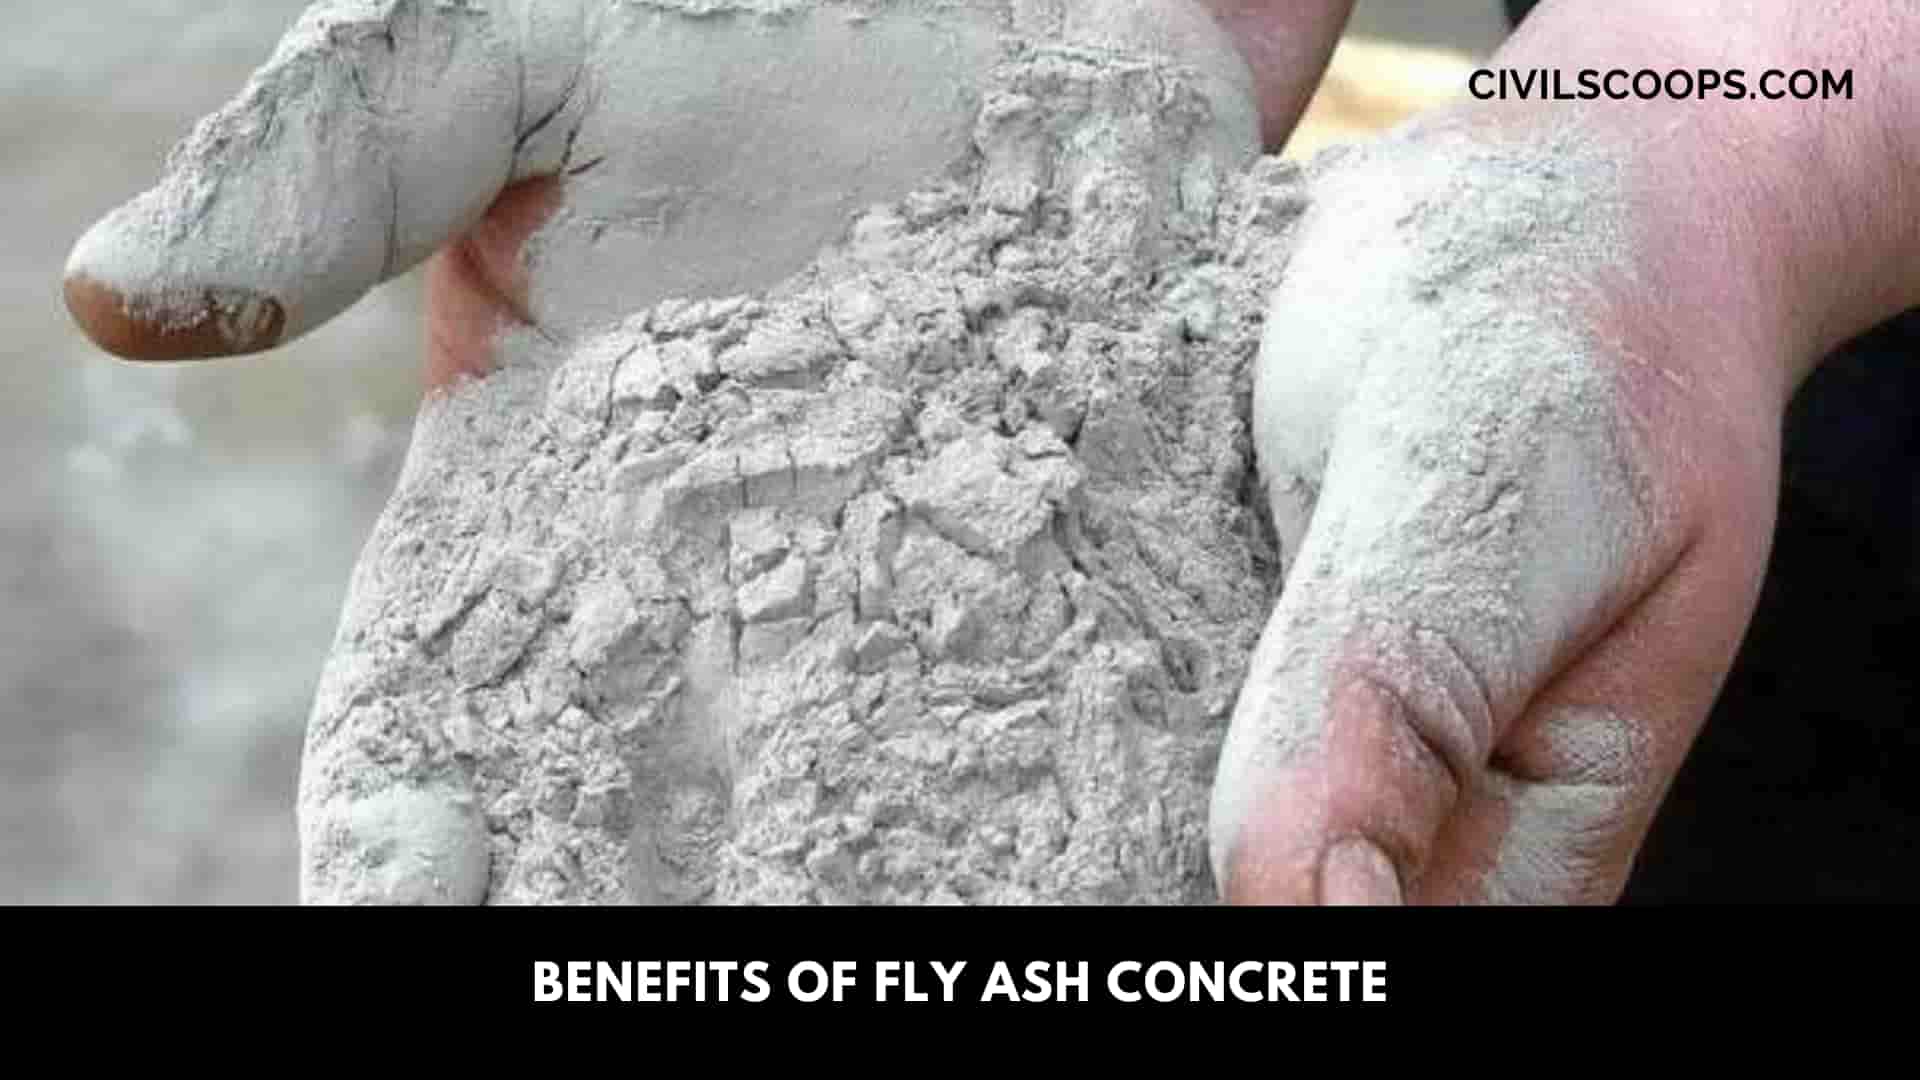 Benefits of Fly Ash Concrete